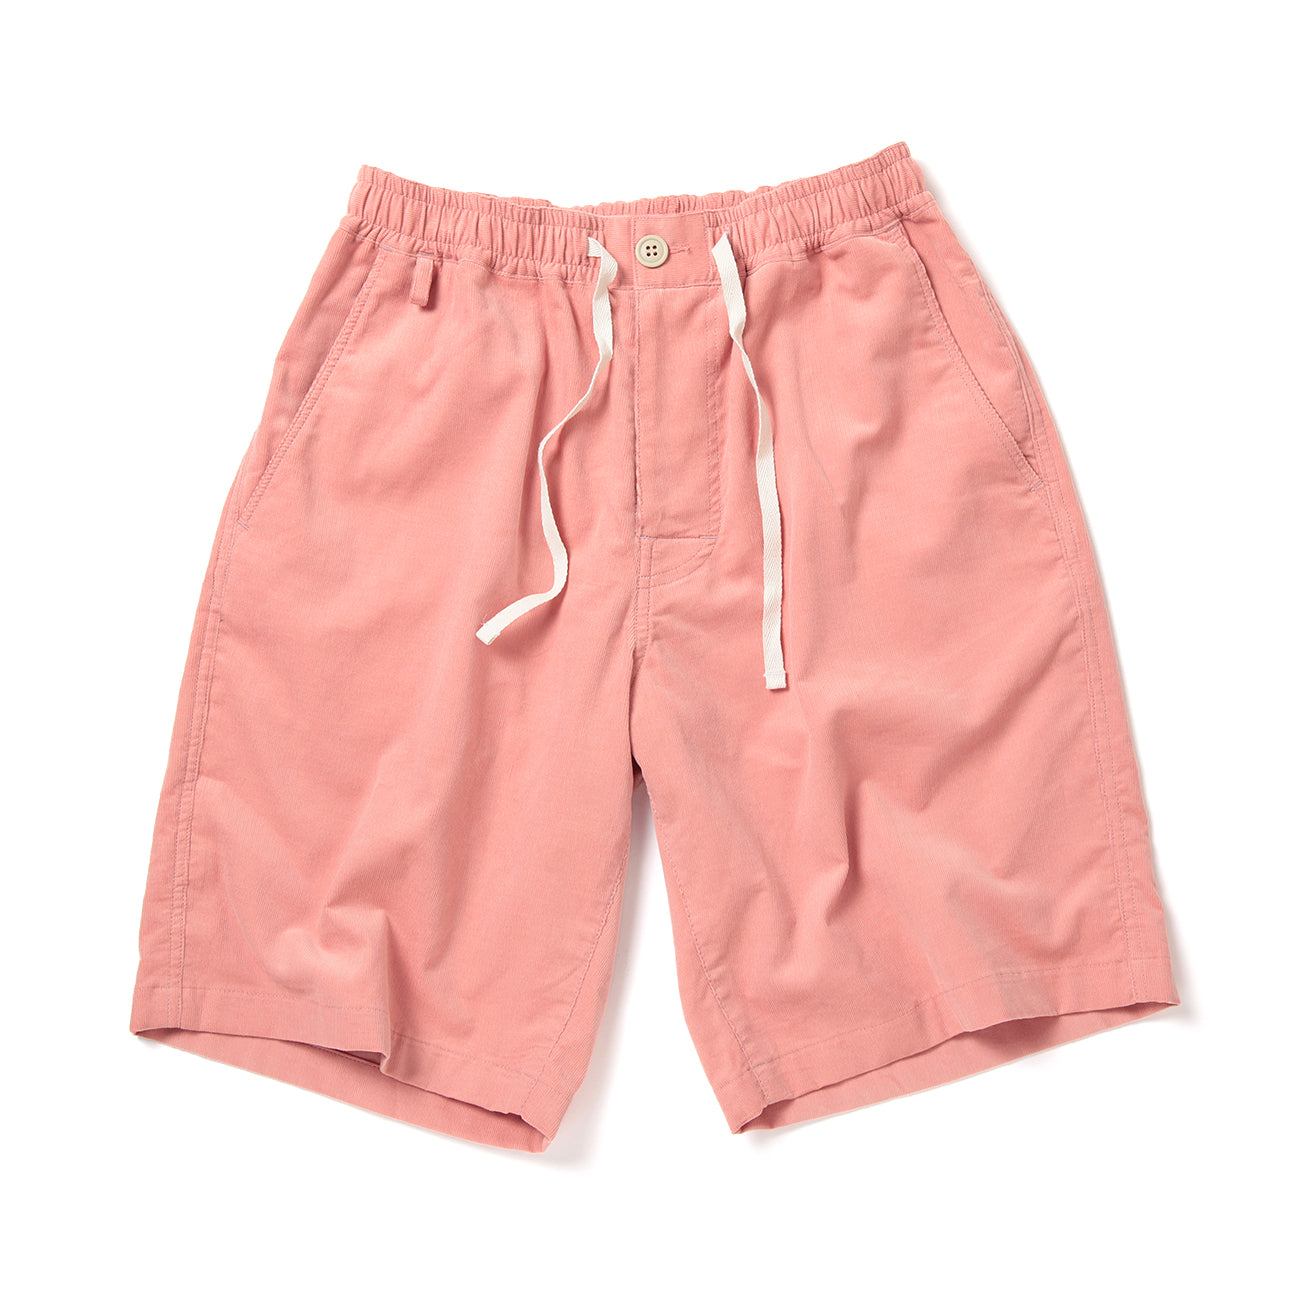 ALL PRODUCTS | Short pants every day